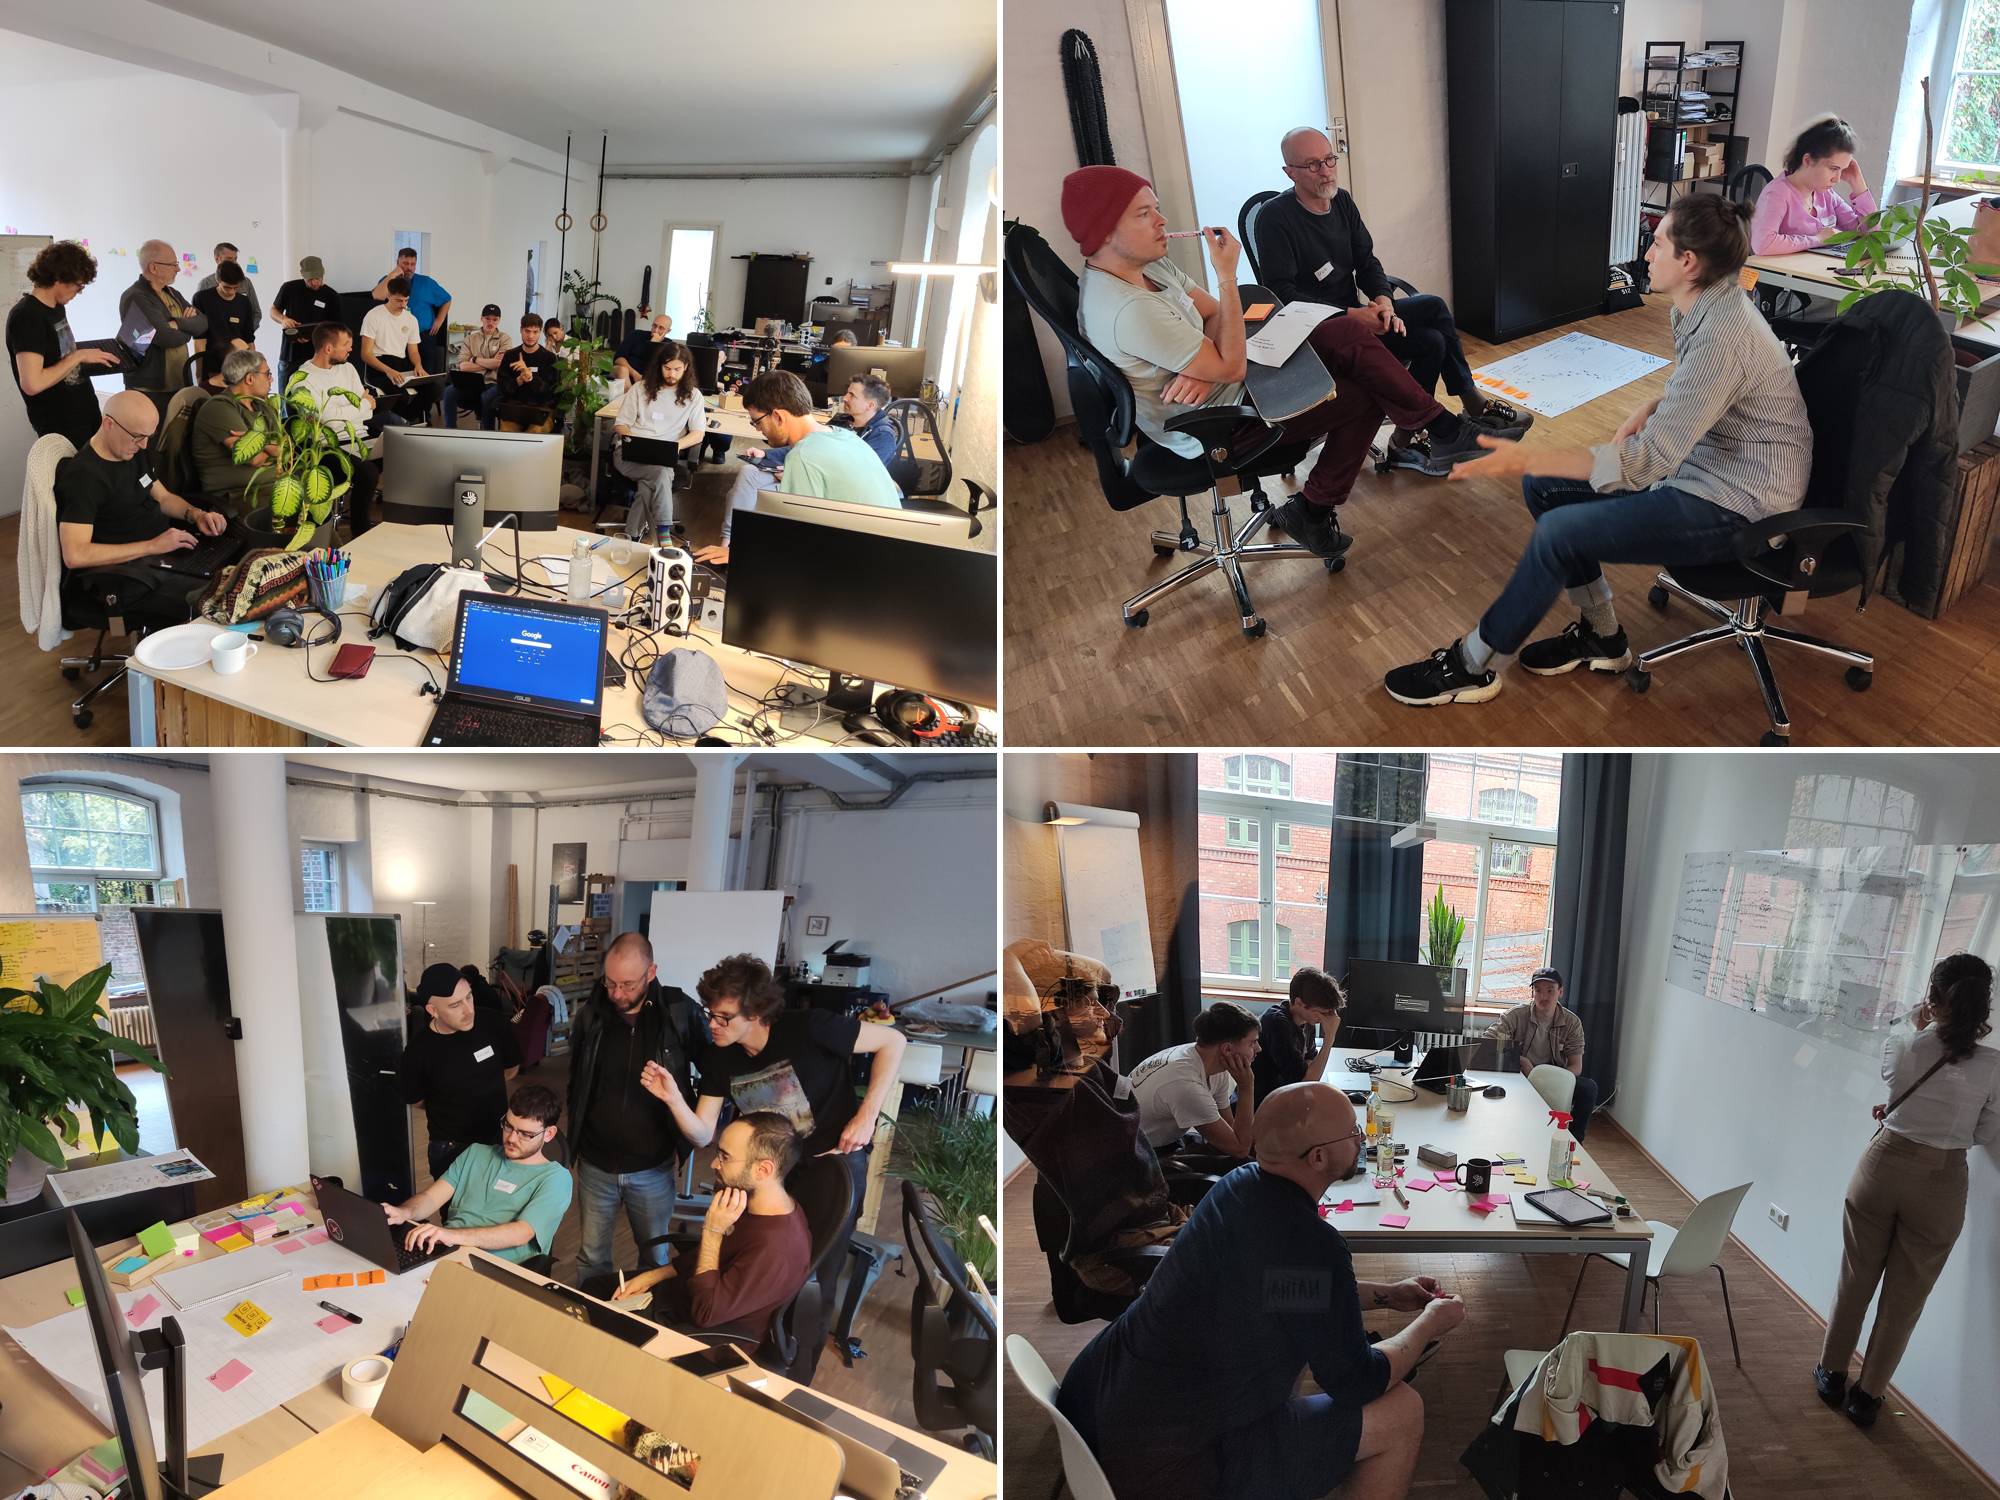 A montage of four photos, all depicting Berlin hackathon participants listening to lectures, having conversations with each other, swarming over a design challenge, or mapping out a design on whiteboards